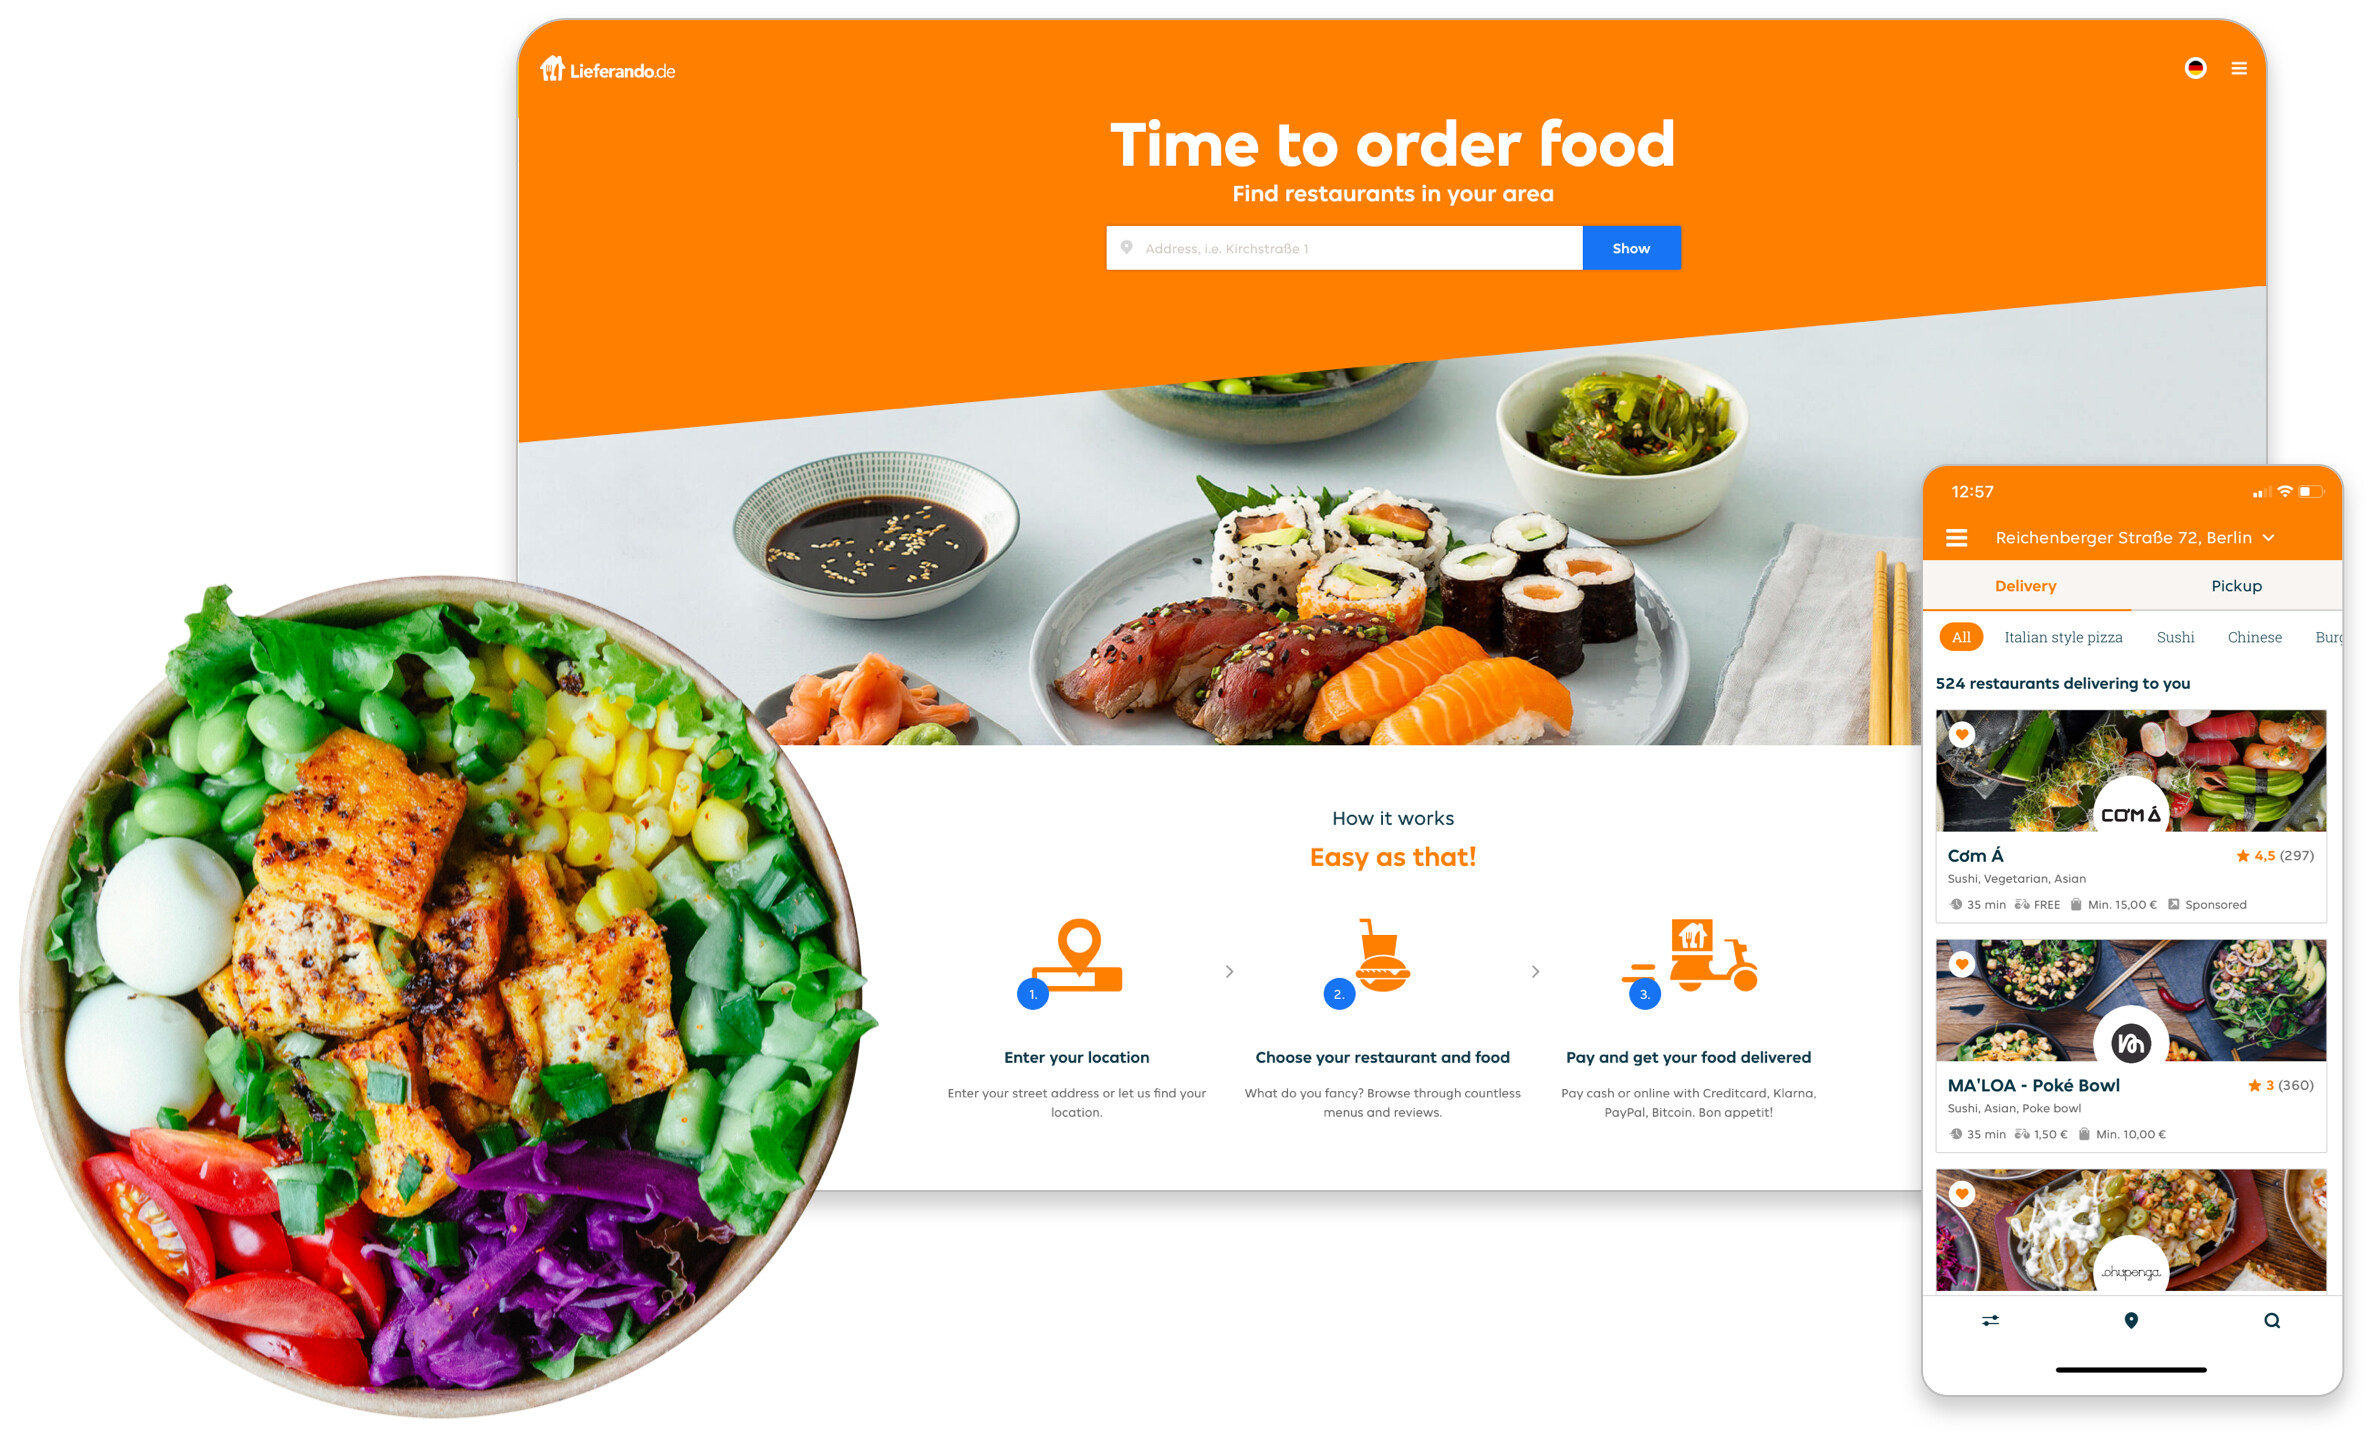 Just Eat Takeaway.com’s new B2B platform can now easily integrate their business acquisitions